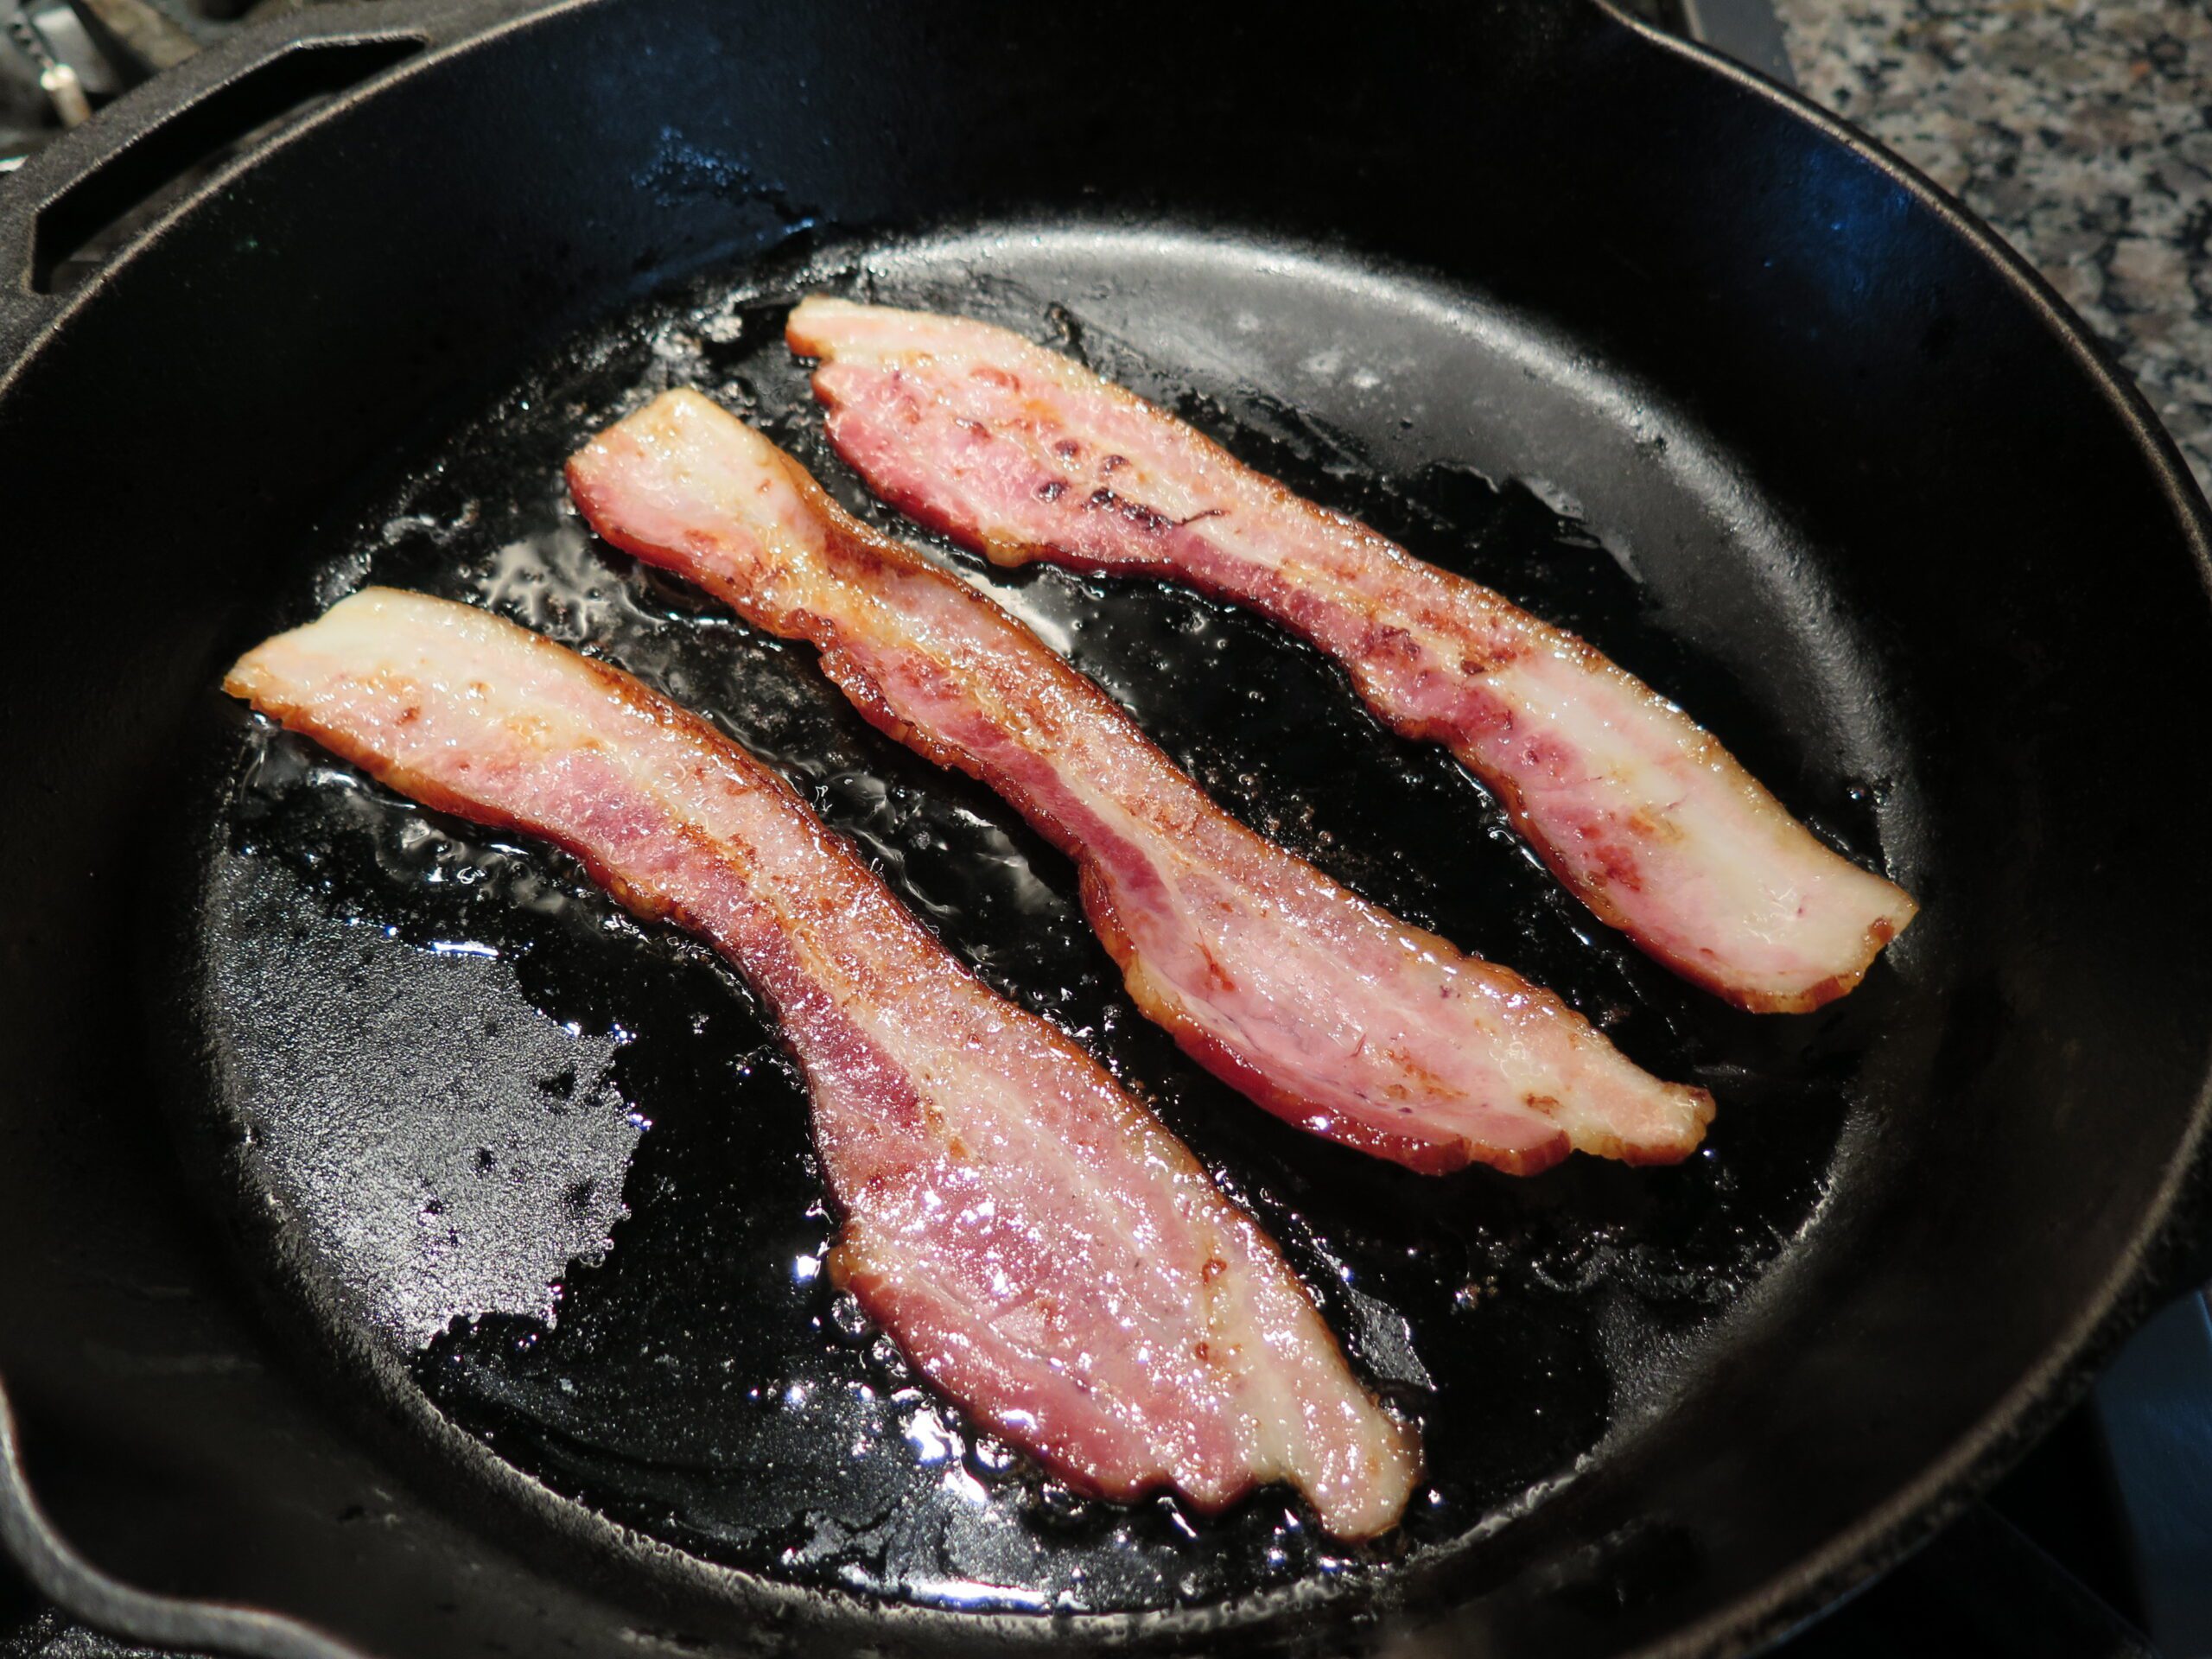 Cooked bacon in lodge cast iron